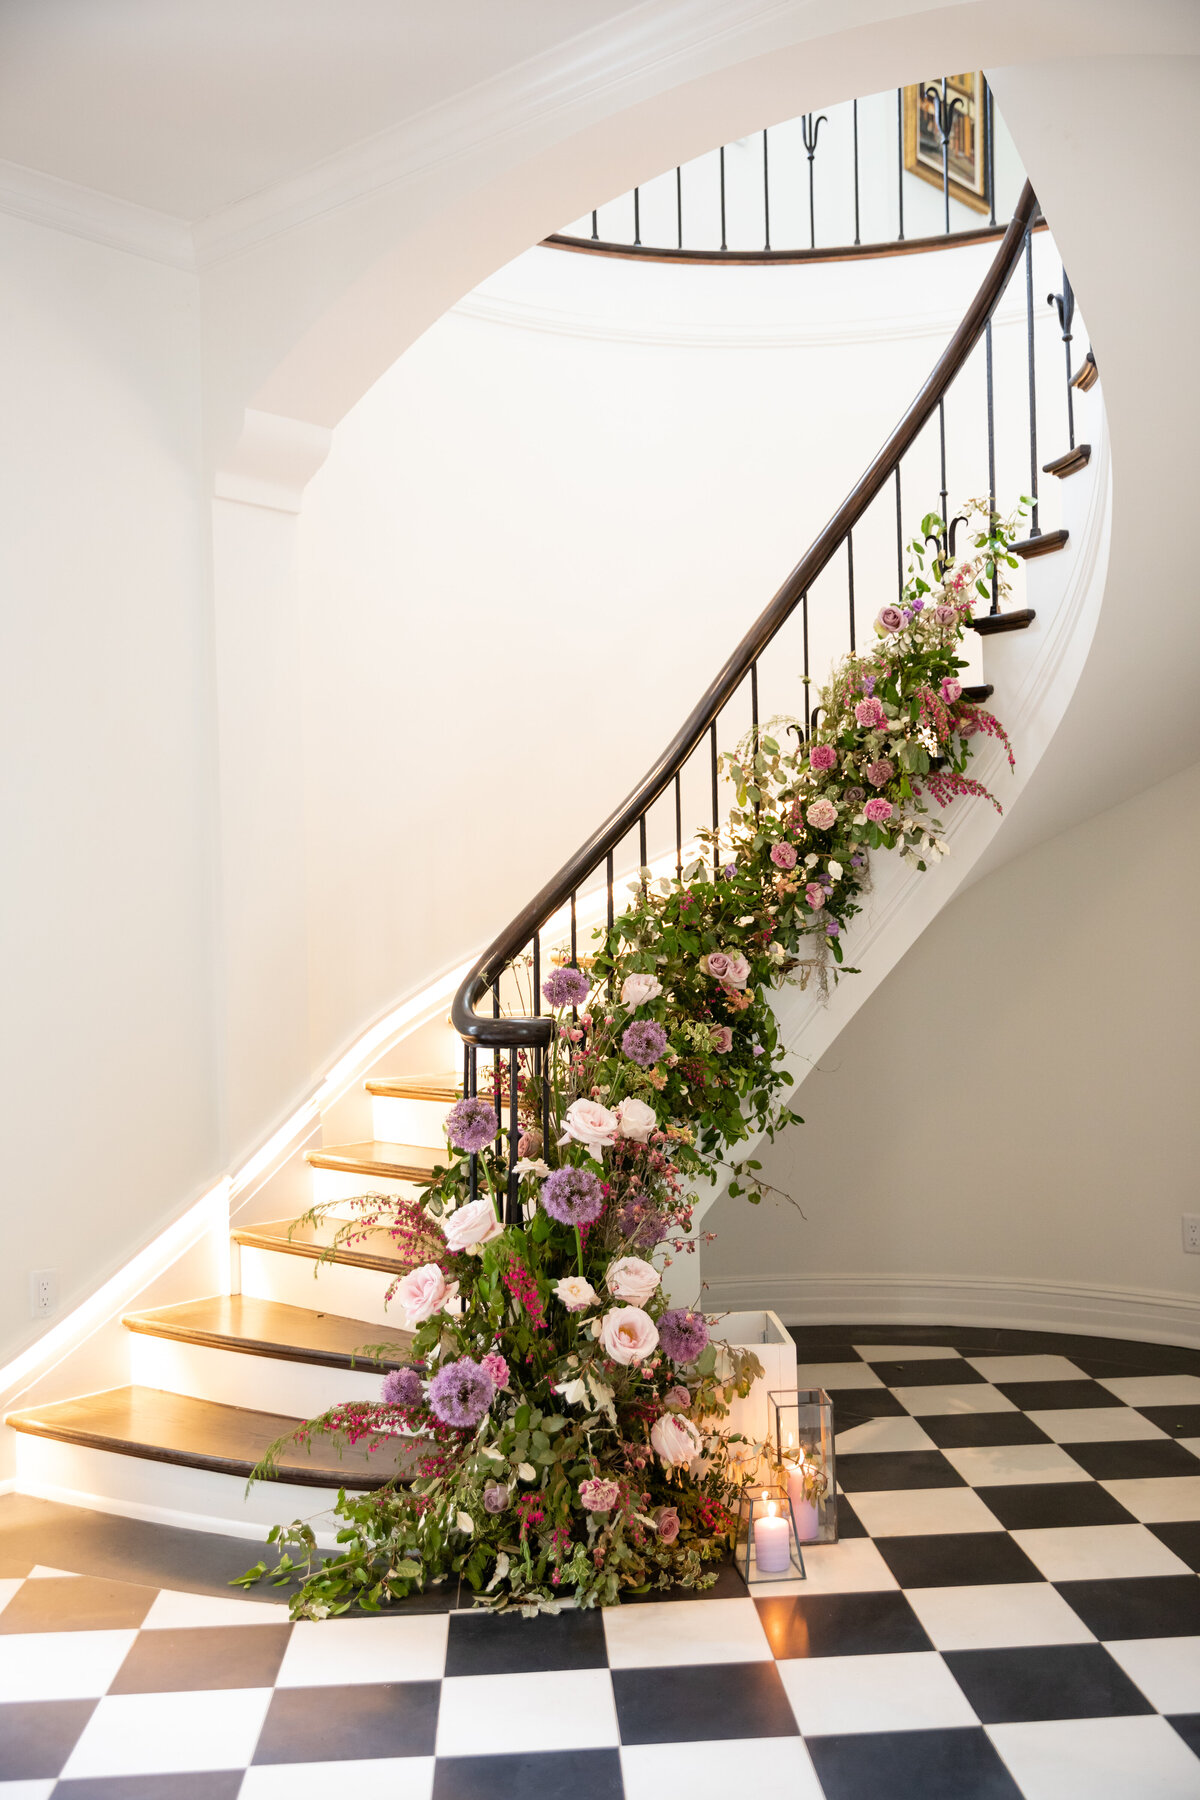 Lush floral installation growing up the staircase with natural greenery, purple globe allium, blush garden roses, and pastel wildflowers. Bridgerton inspired engagement party at a private home in Nashville, TN.